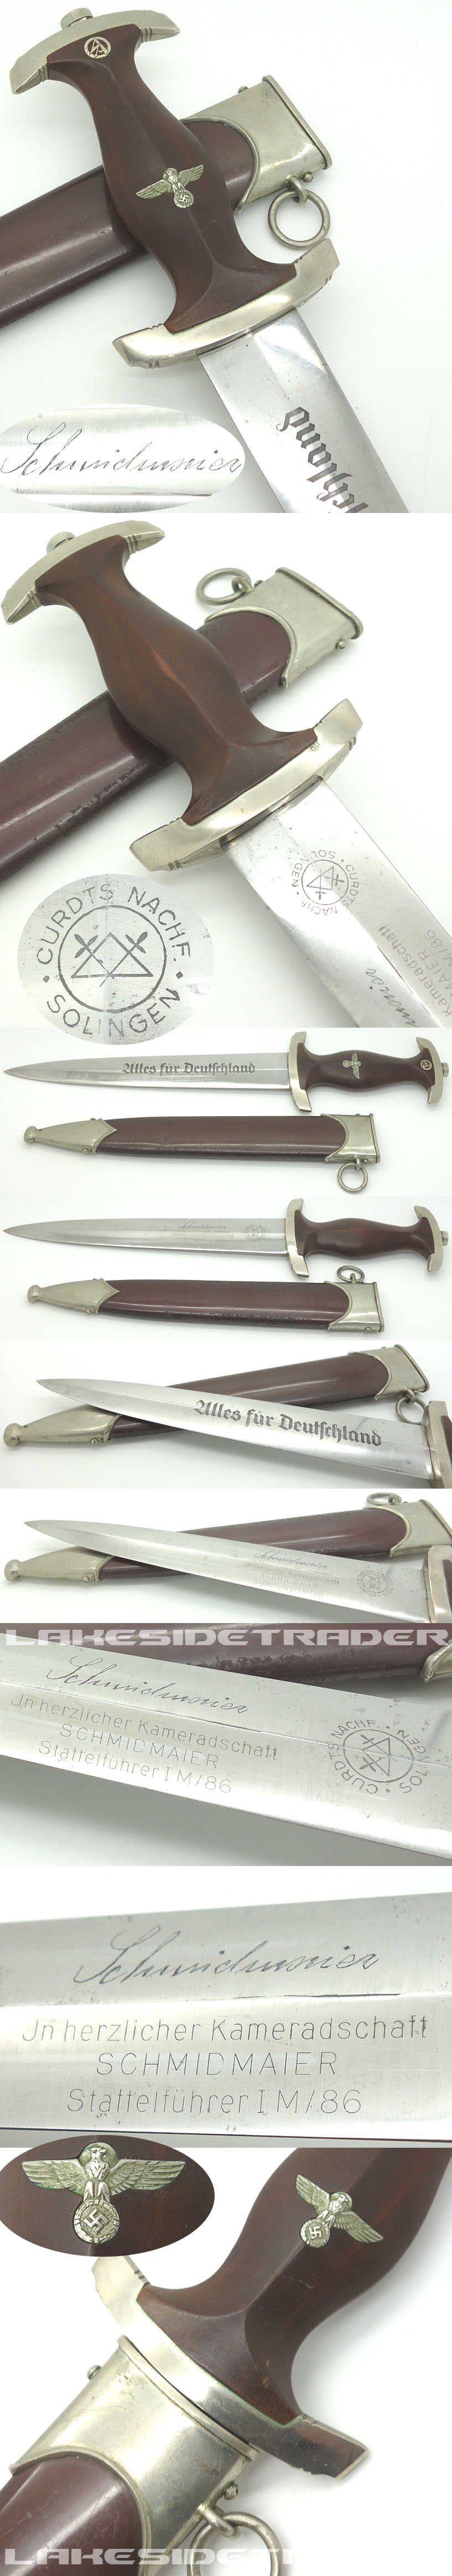 Early Personalized SA Dagger by Curdts Nachf